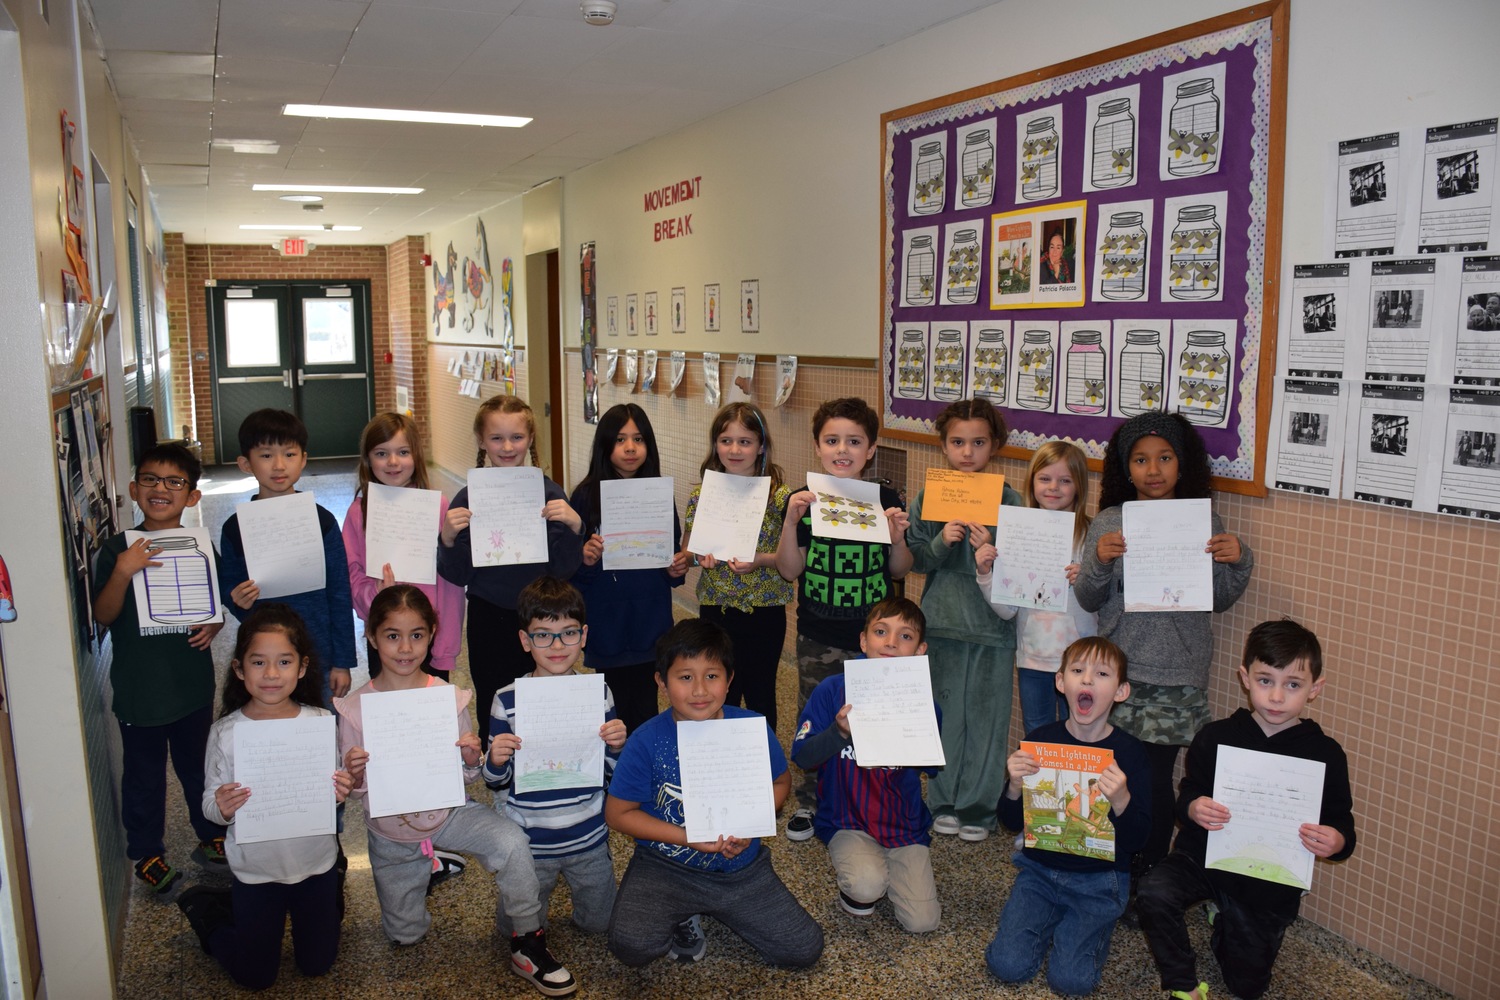 As part of a lesson on friendly letter writing and memory stories, Westhampton Beach second grade students in Stella Boscia’s class wrote letters to author Patricia Polacco. Prior to writing their letters, the students read Polacco’s book “When Lightning Comes in a Jar.” The students’ letters asked the author about her book and if it reflected her own memories. They are eagerly awaiting her reply. COURTESY WESTHAMPTON BEACH SCHOOL DISTRICT